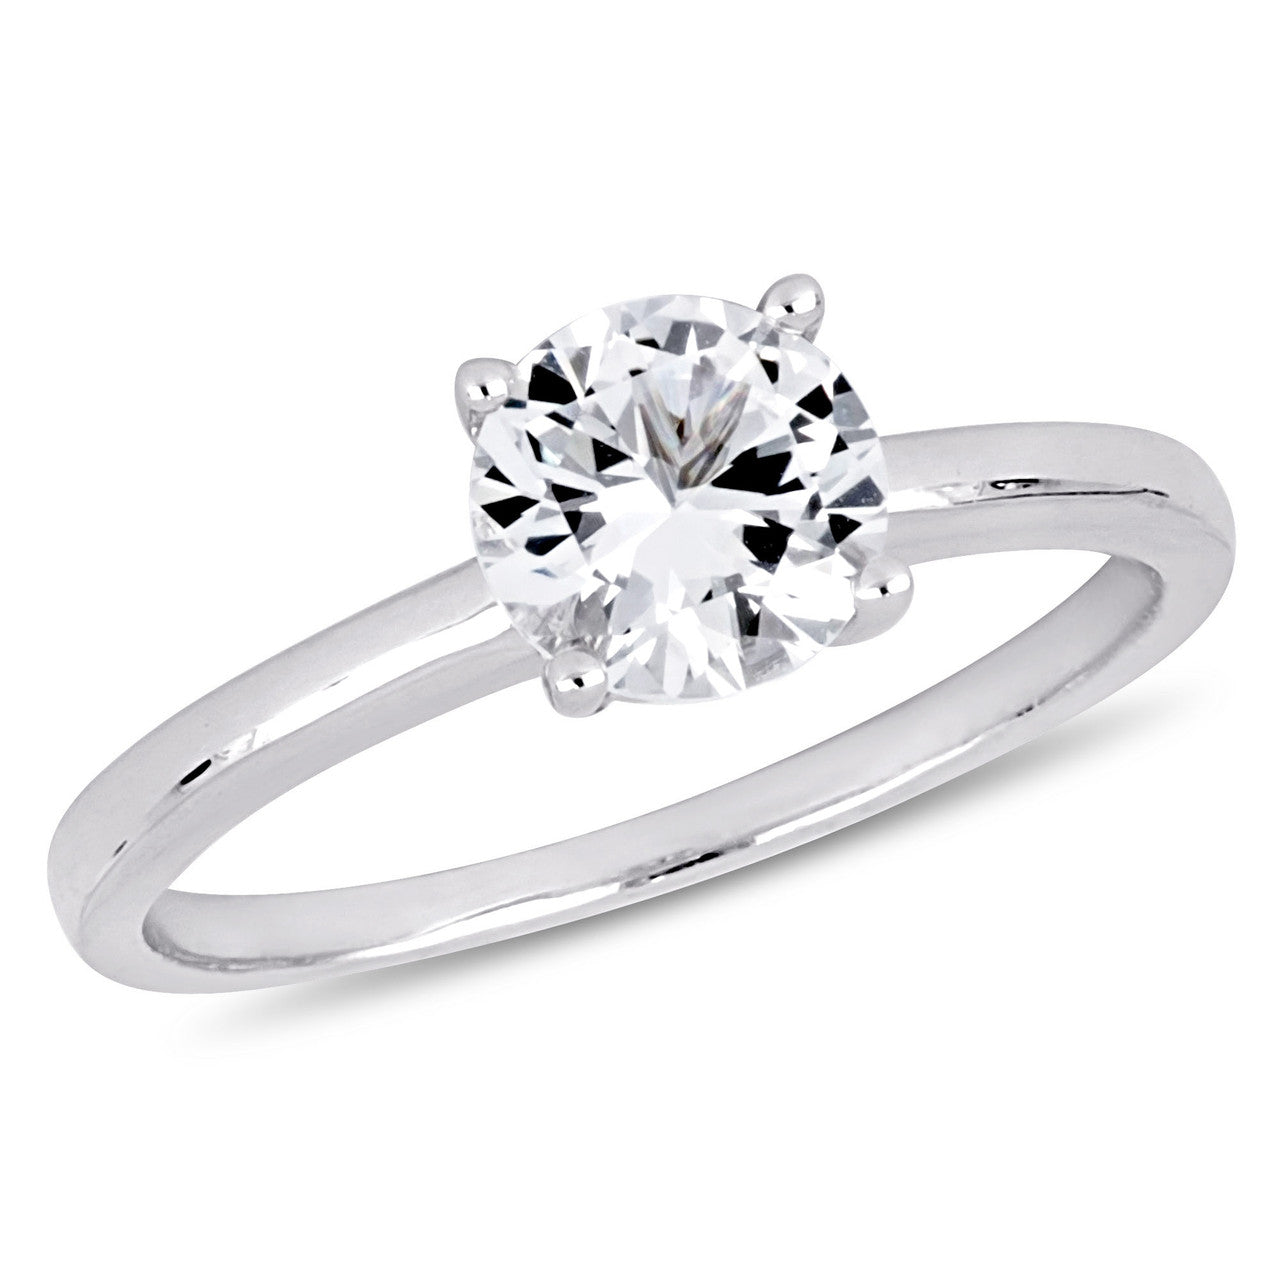 Ice Jewellery 1 1/4 CT TGW Created White Sapphire Solitaire Ring in 10k White Gold - 75000004676 | Ice Jewellery Australia